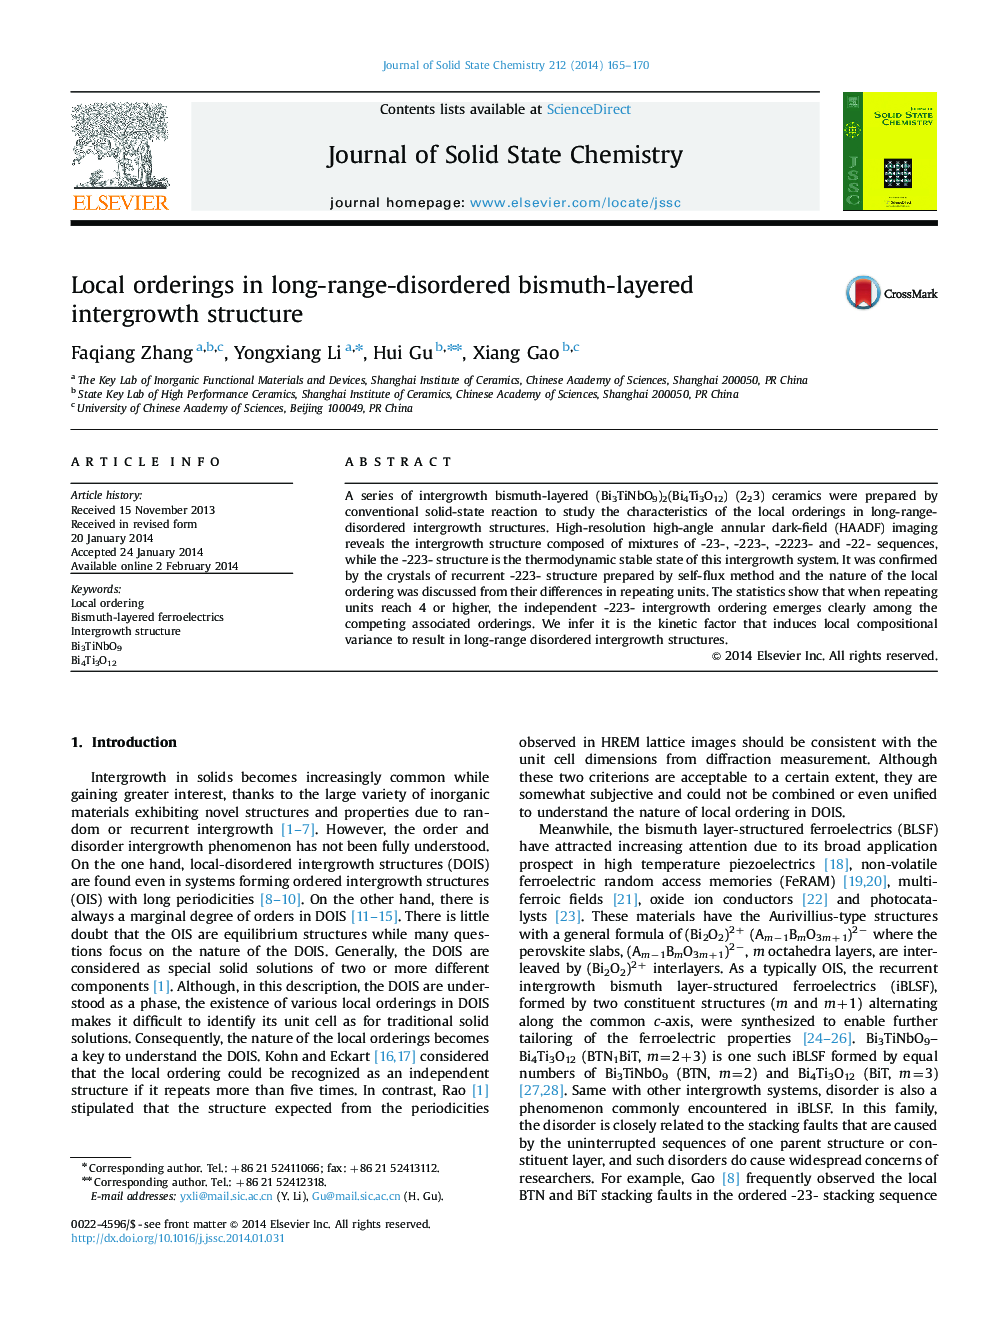 Local orderings in long-range-disordered bismuth-layered intergrowth structure